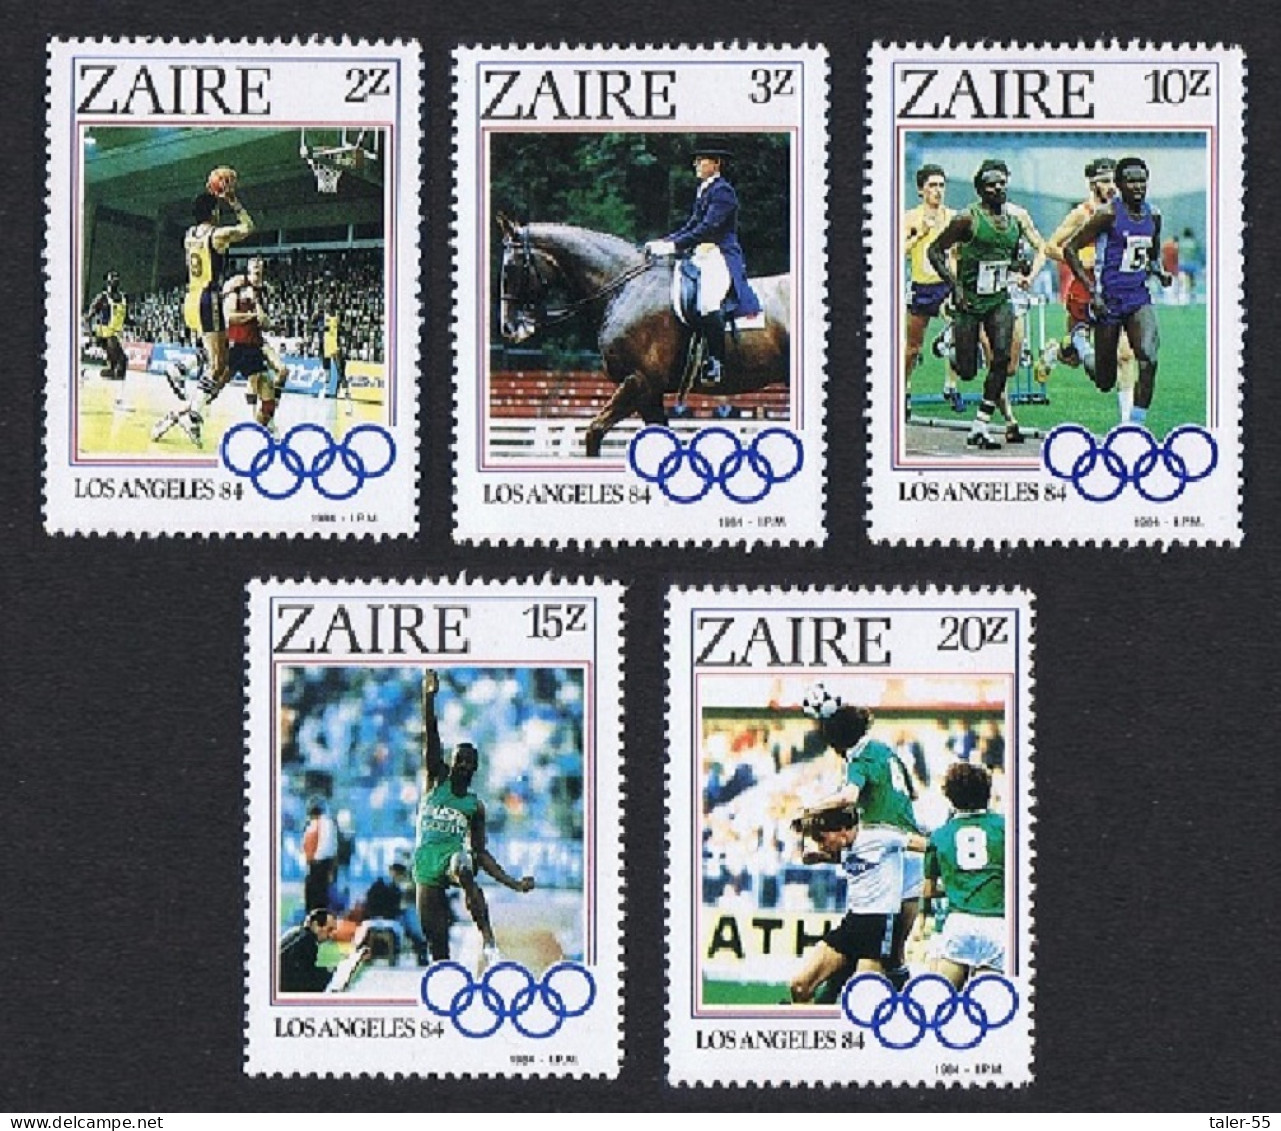 Zaire Olympic Games Los Angeles 5v 1984 MNH SG#1195-1199 Sc#1154-1158 - Ungebraucht